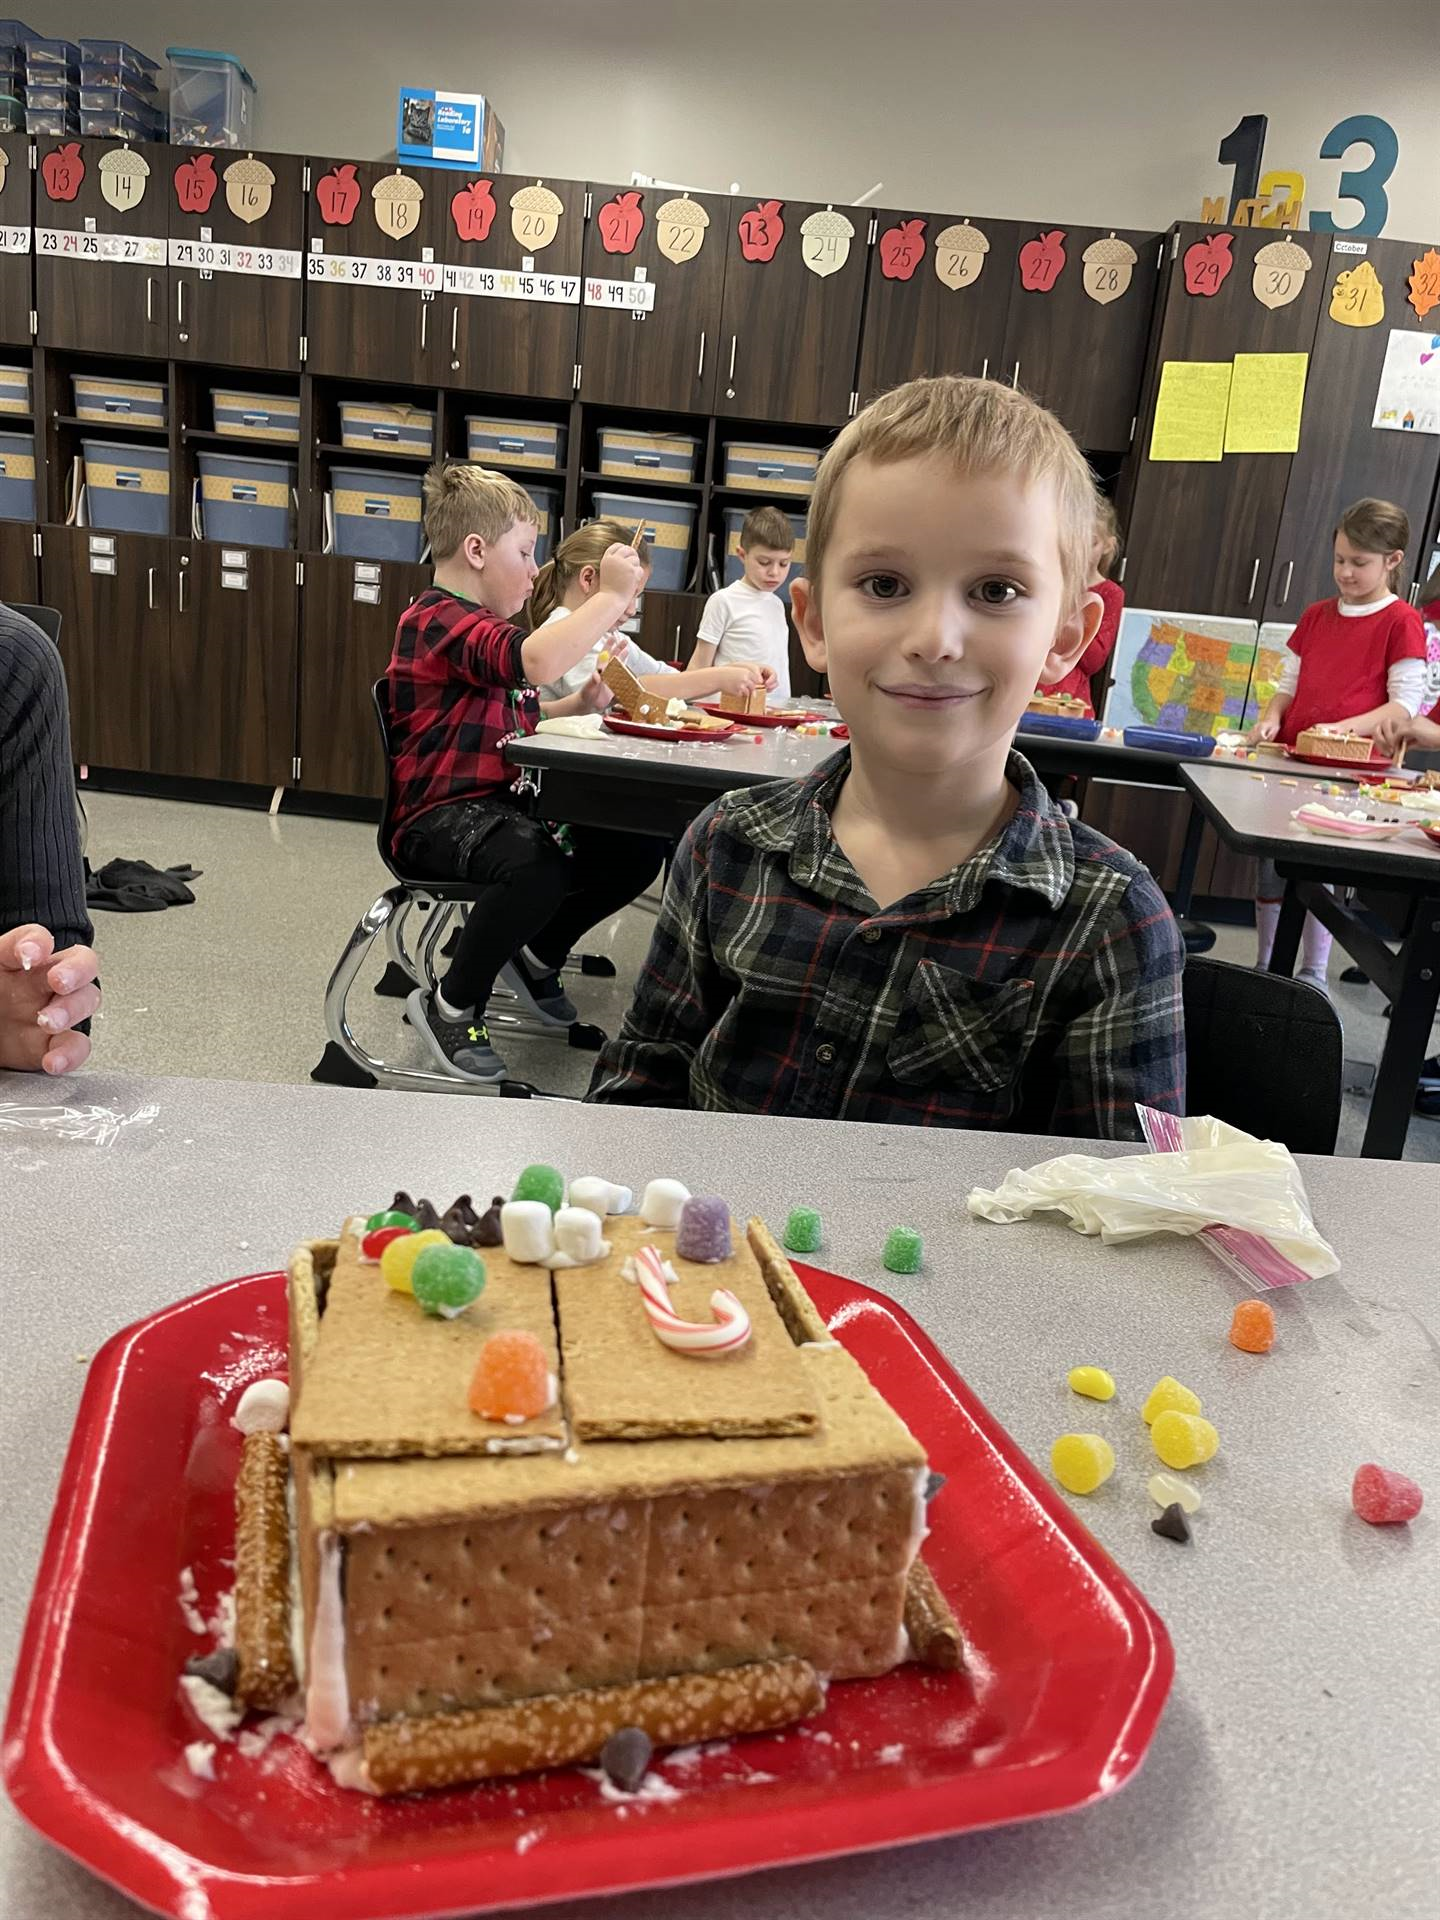 Levon with gingerbread house